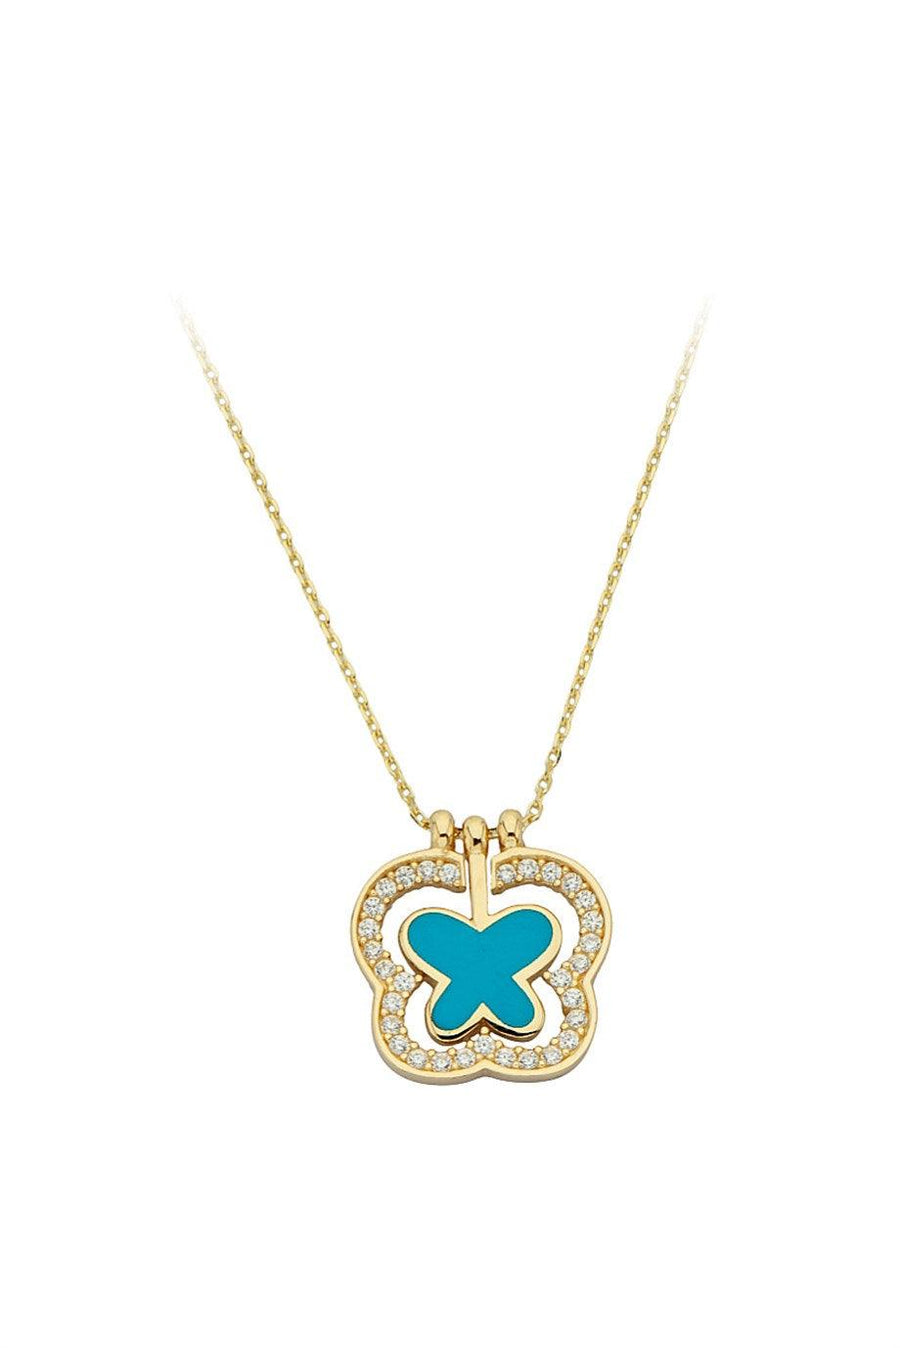 Gold Encouragement Butterfly Necklace